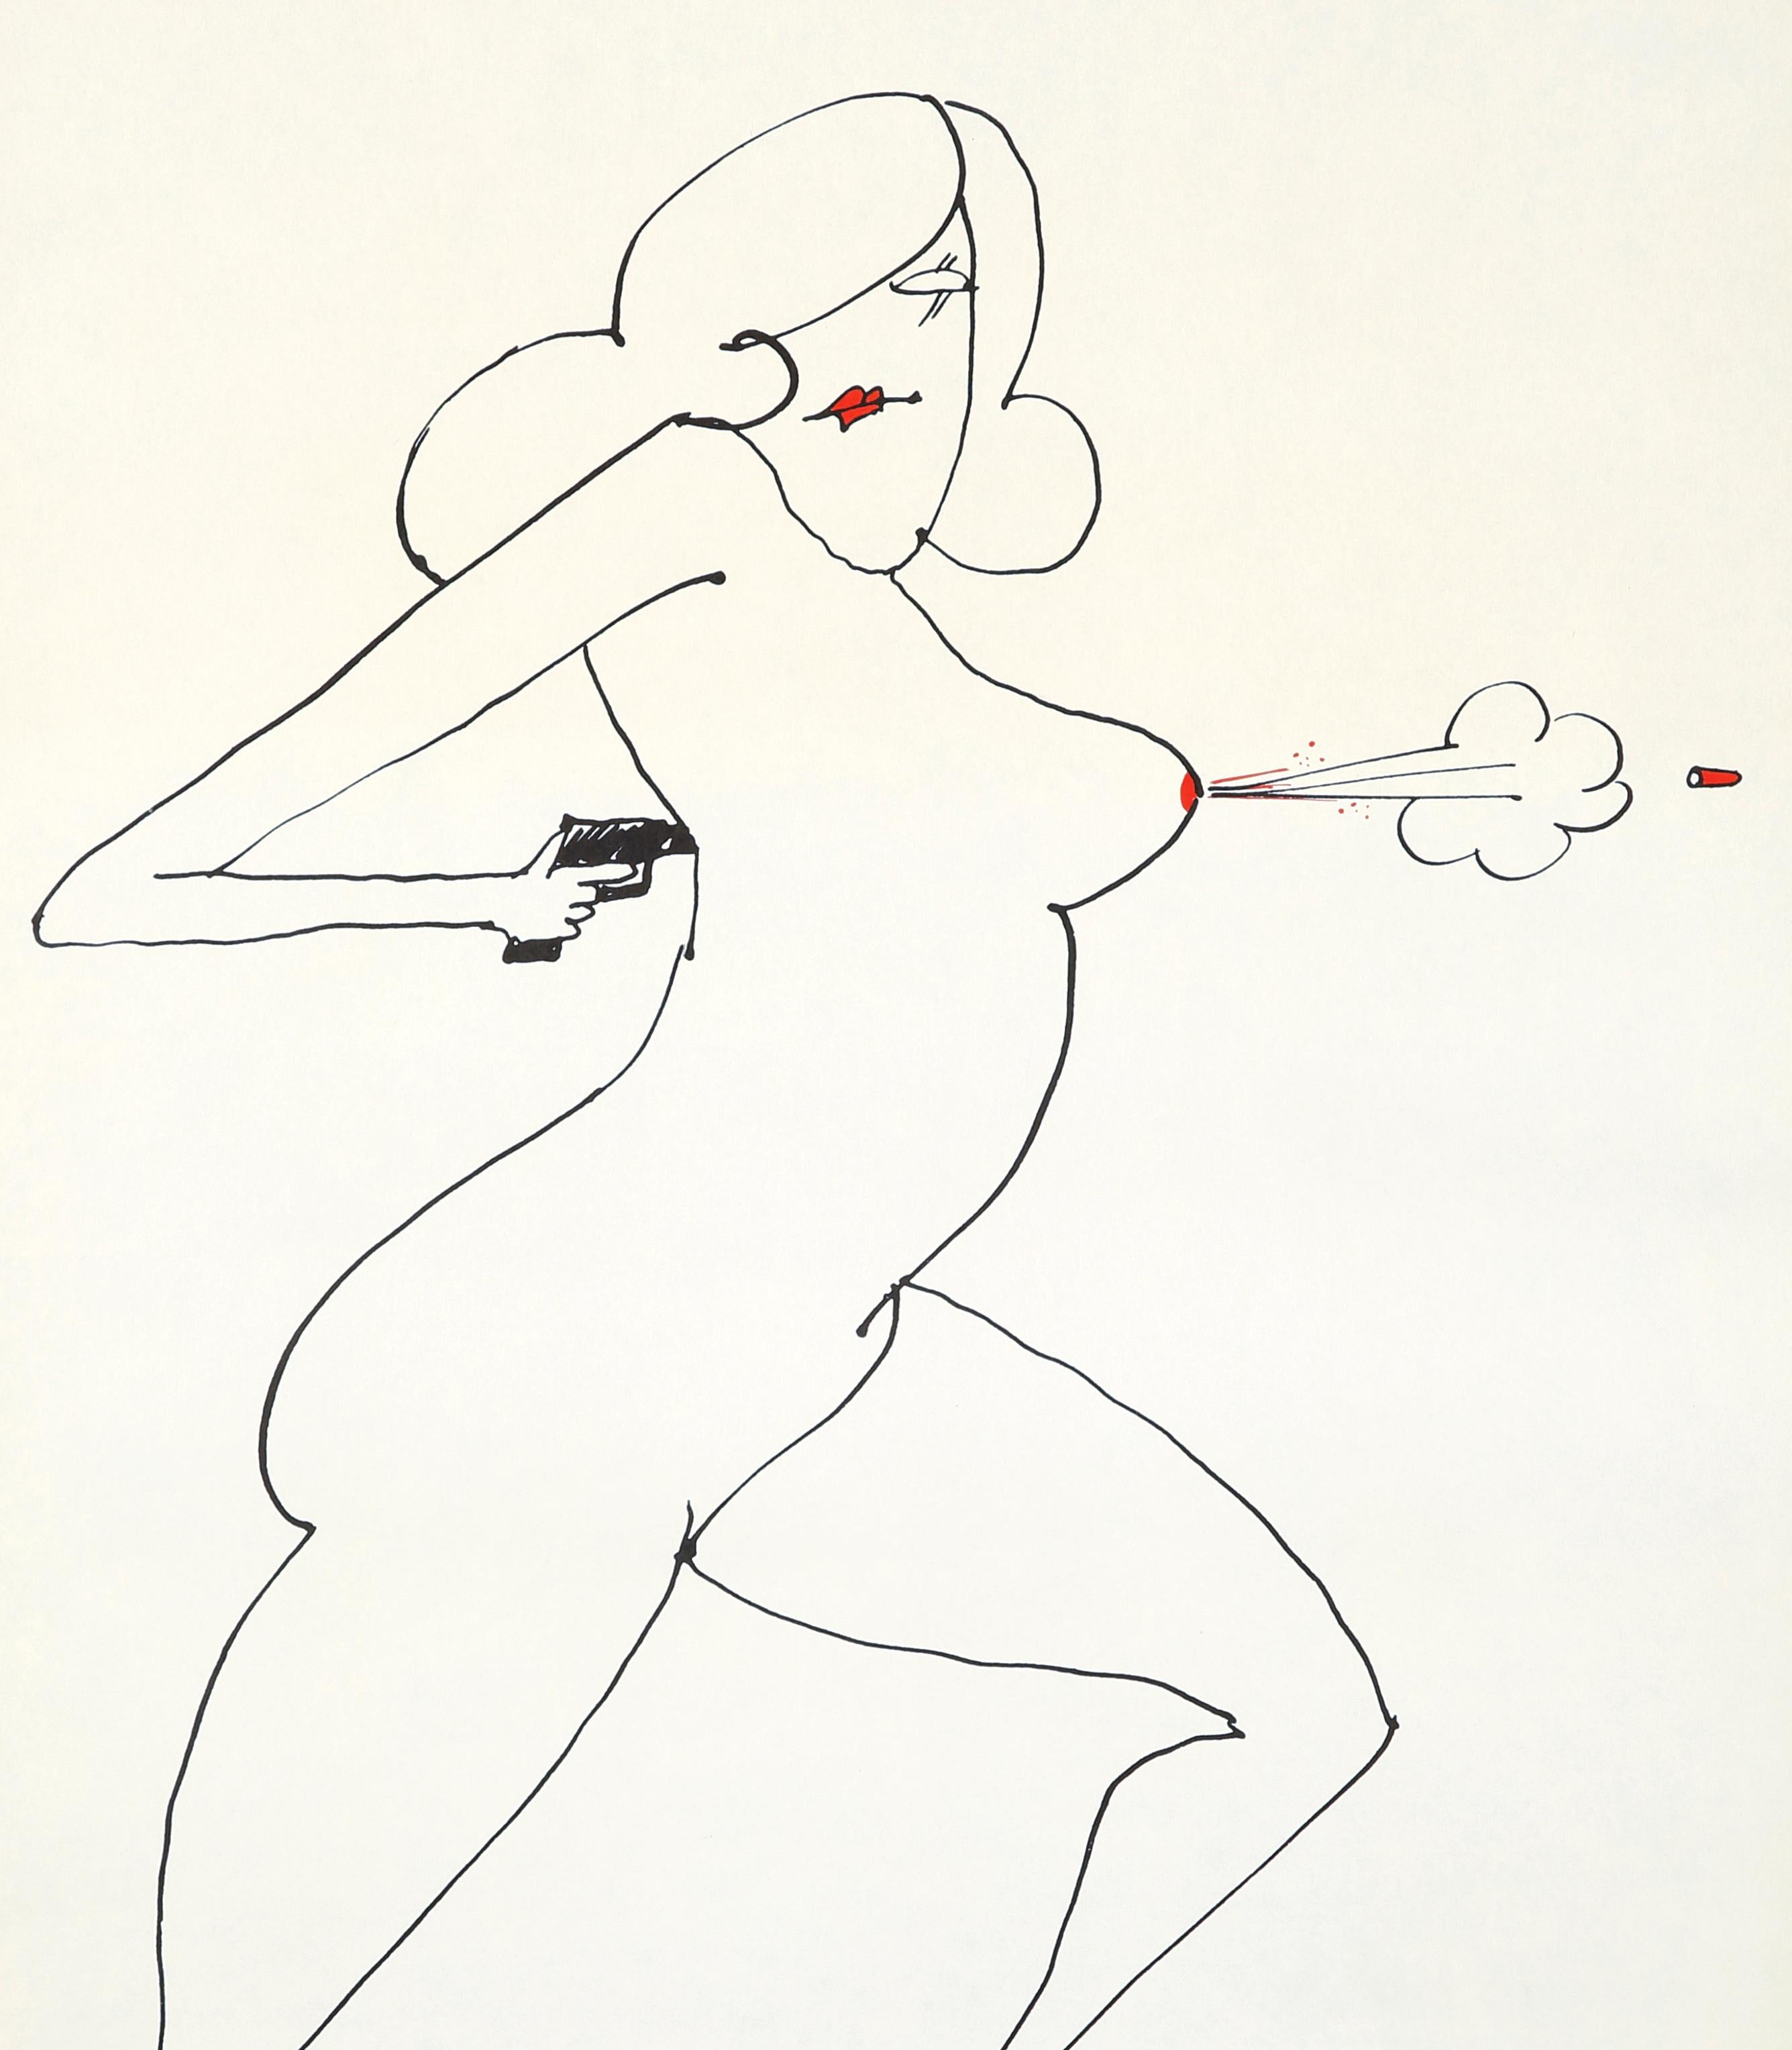 Tomi Ungerer Nude Gun: a selection from Underground Sketchbook:

First printing, 1965.
Medium: Vintage poster.
Dimensions: 23 in. x 29 in. (58.42 cm x 73.66 cm).
Very good overall vintage condition; minor signs of handling. 
Unsigned from an edition